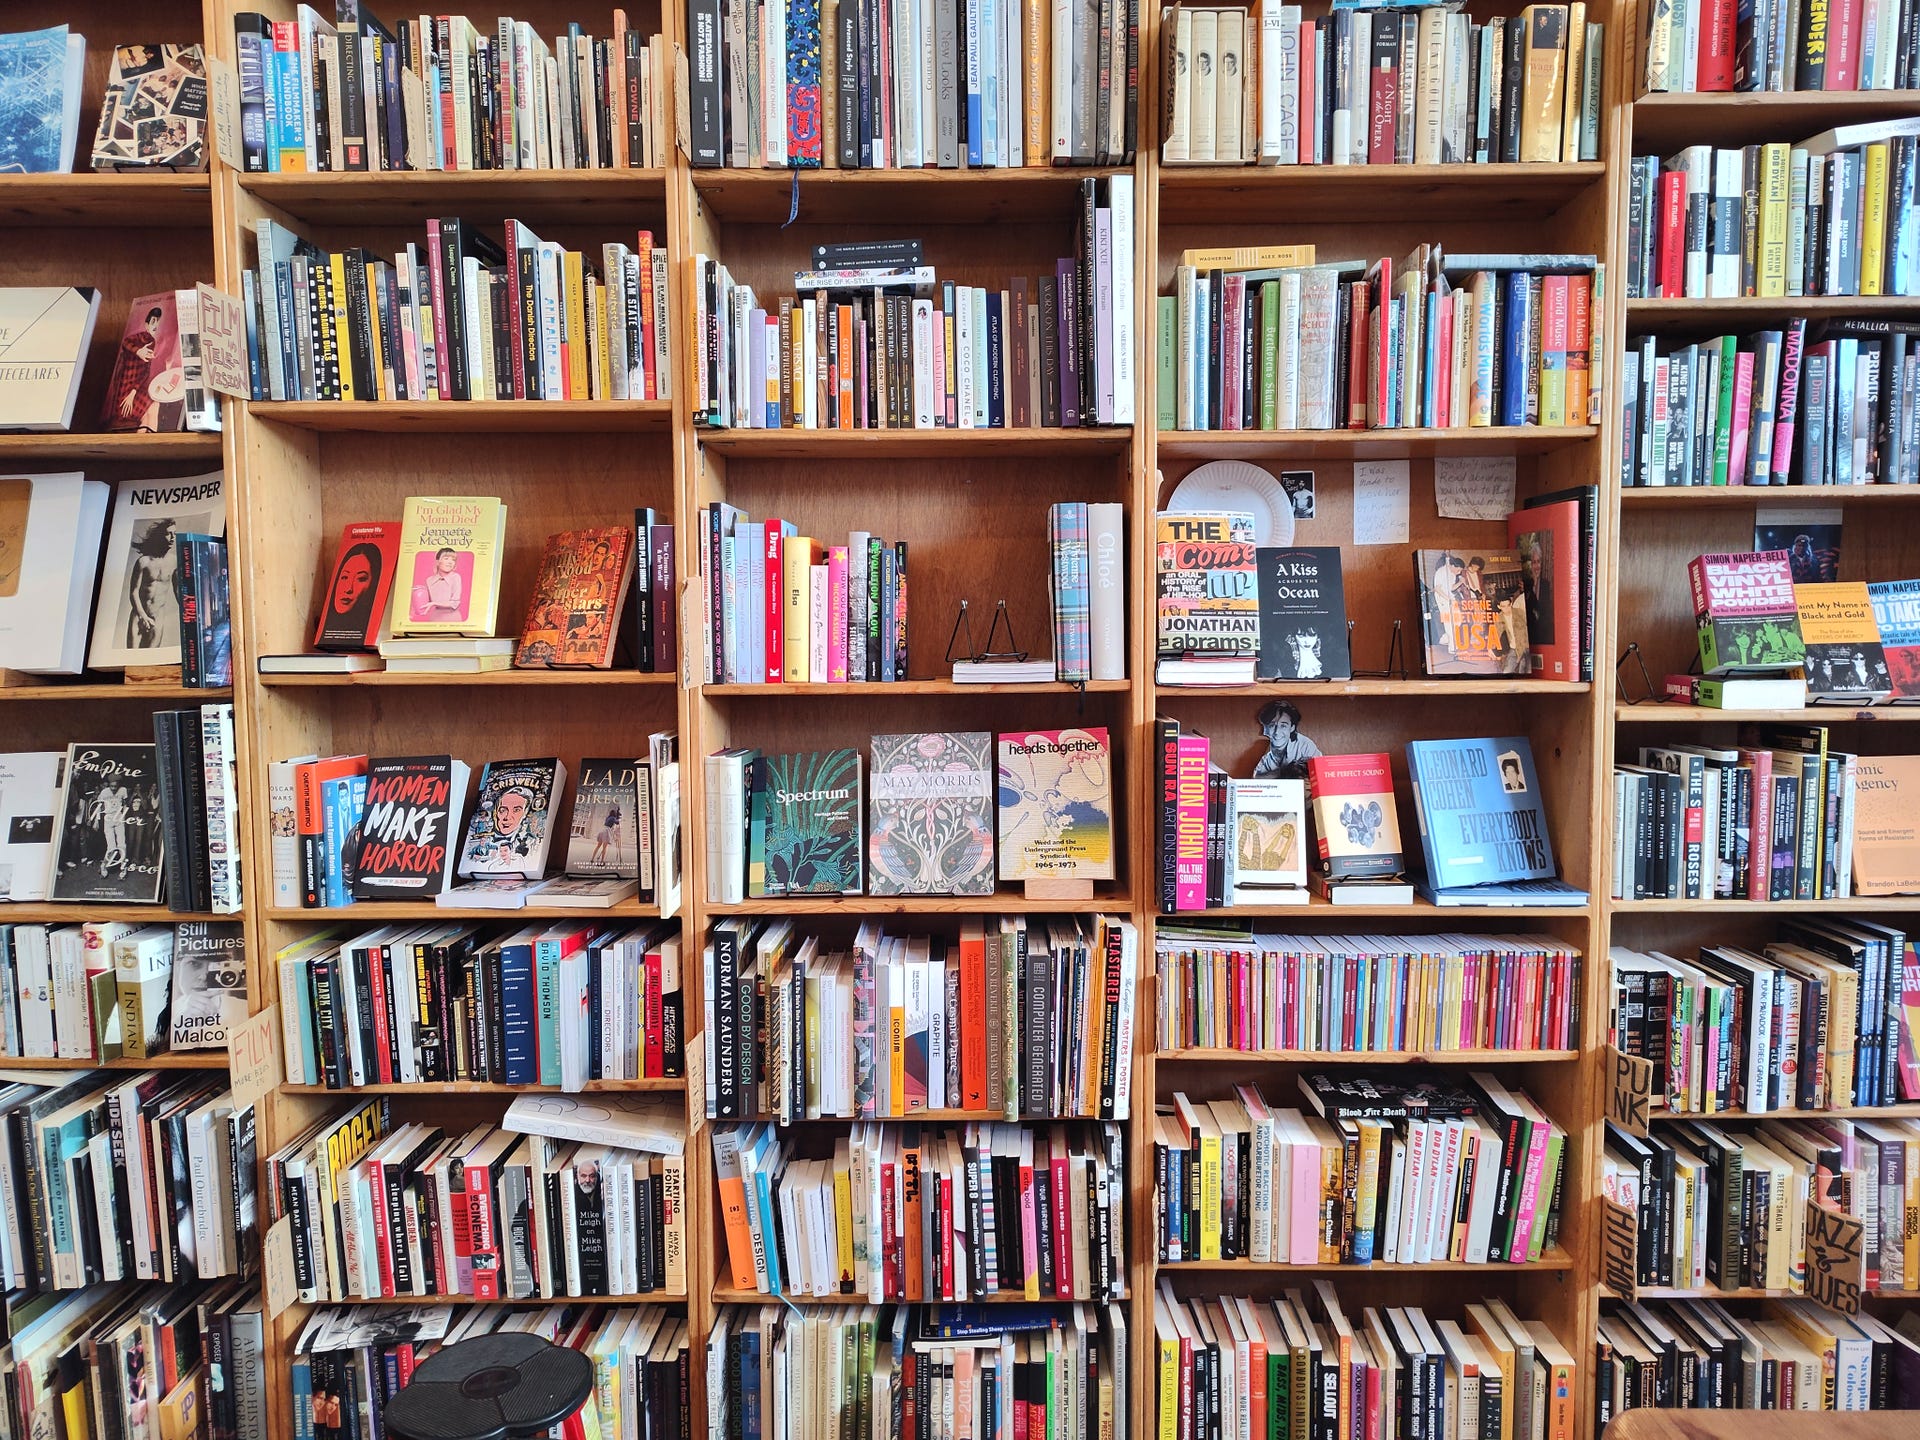 A wall of bookshelves filled with books